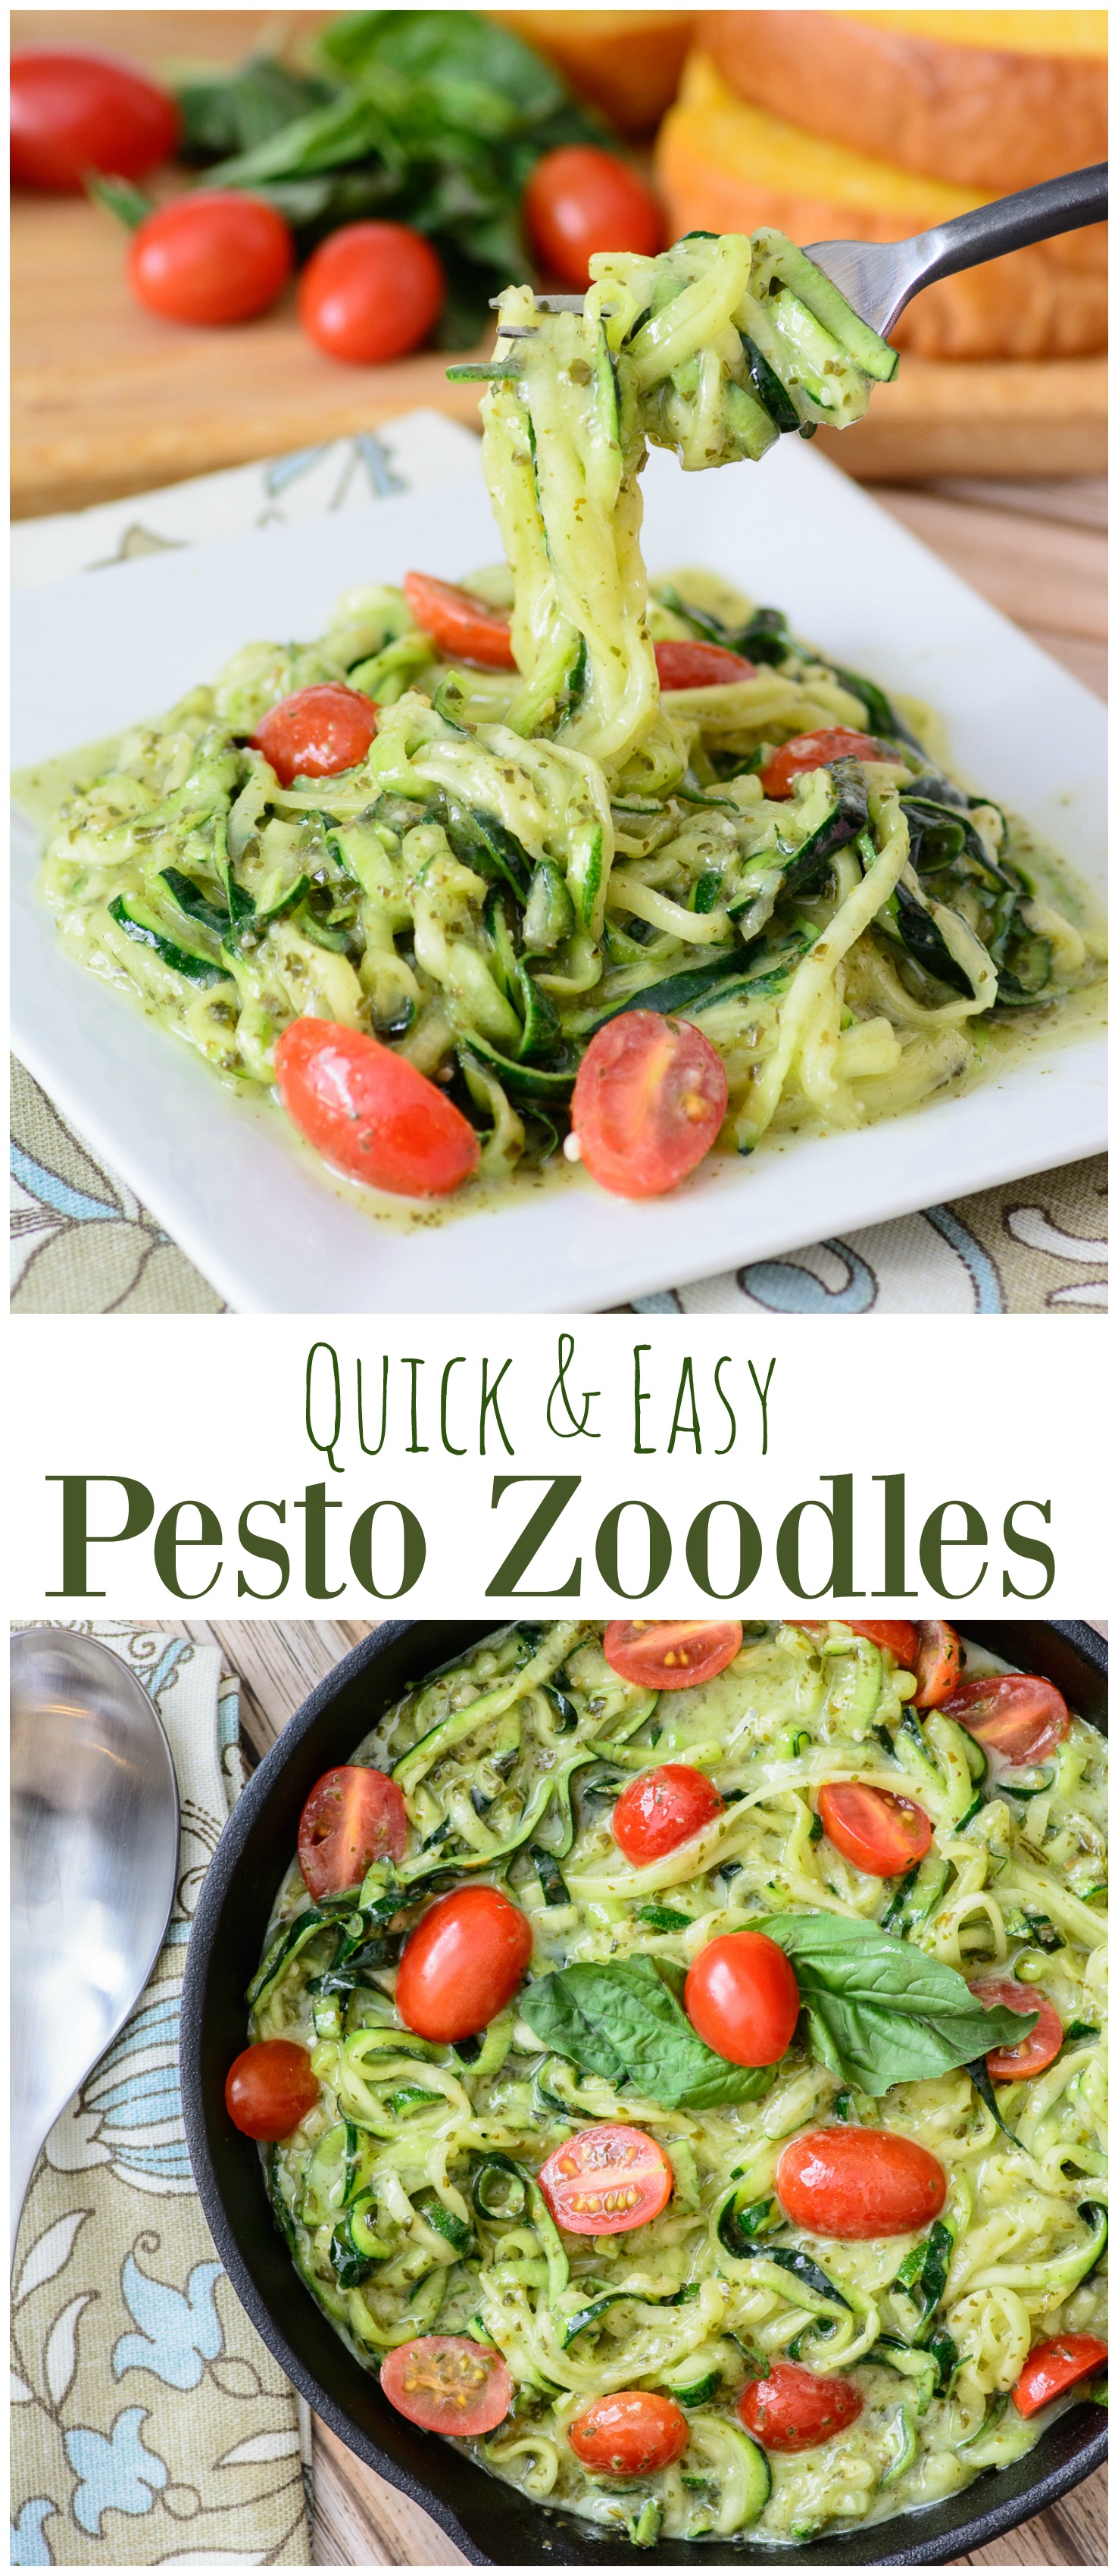 Creamy pesto with fresh zucchini noodles. These are a healthy, low carb, paleo and gluten free alternative to regular noodles. You won't even miss the pasta! Arguably the best zoodle recipe out there.